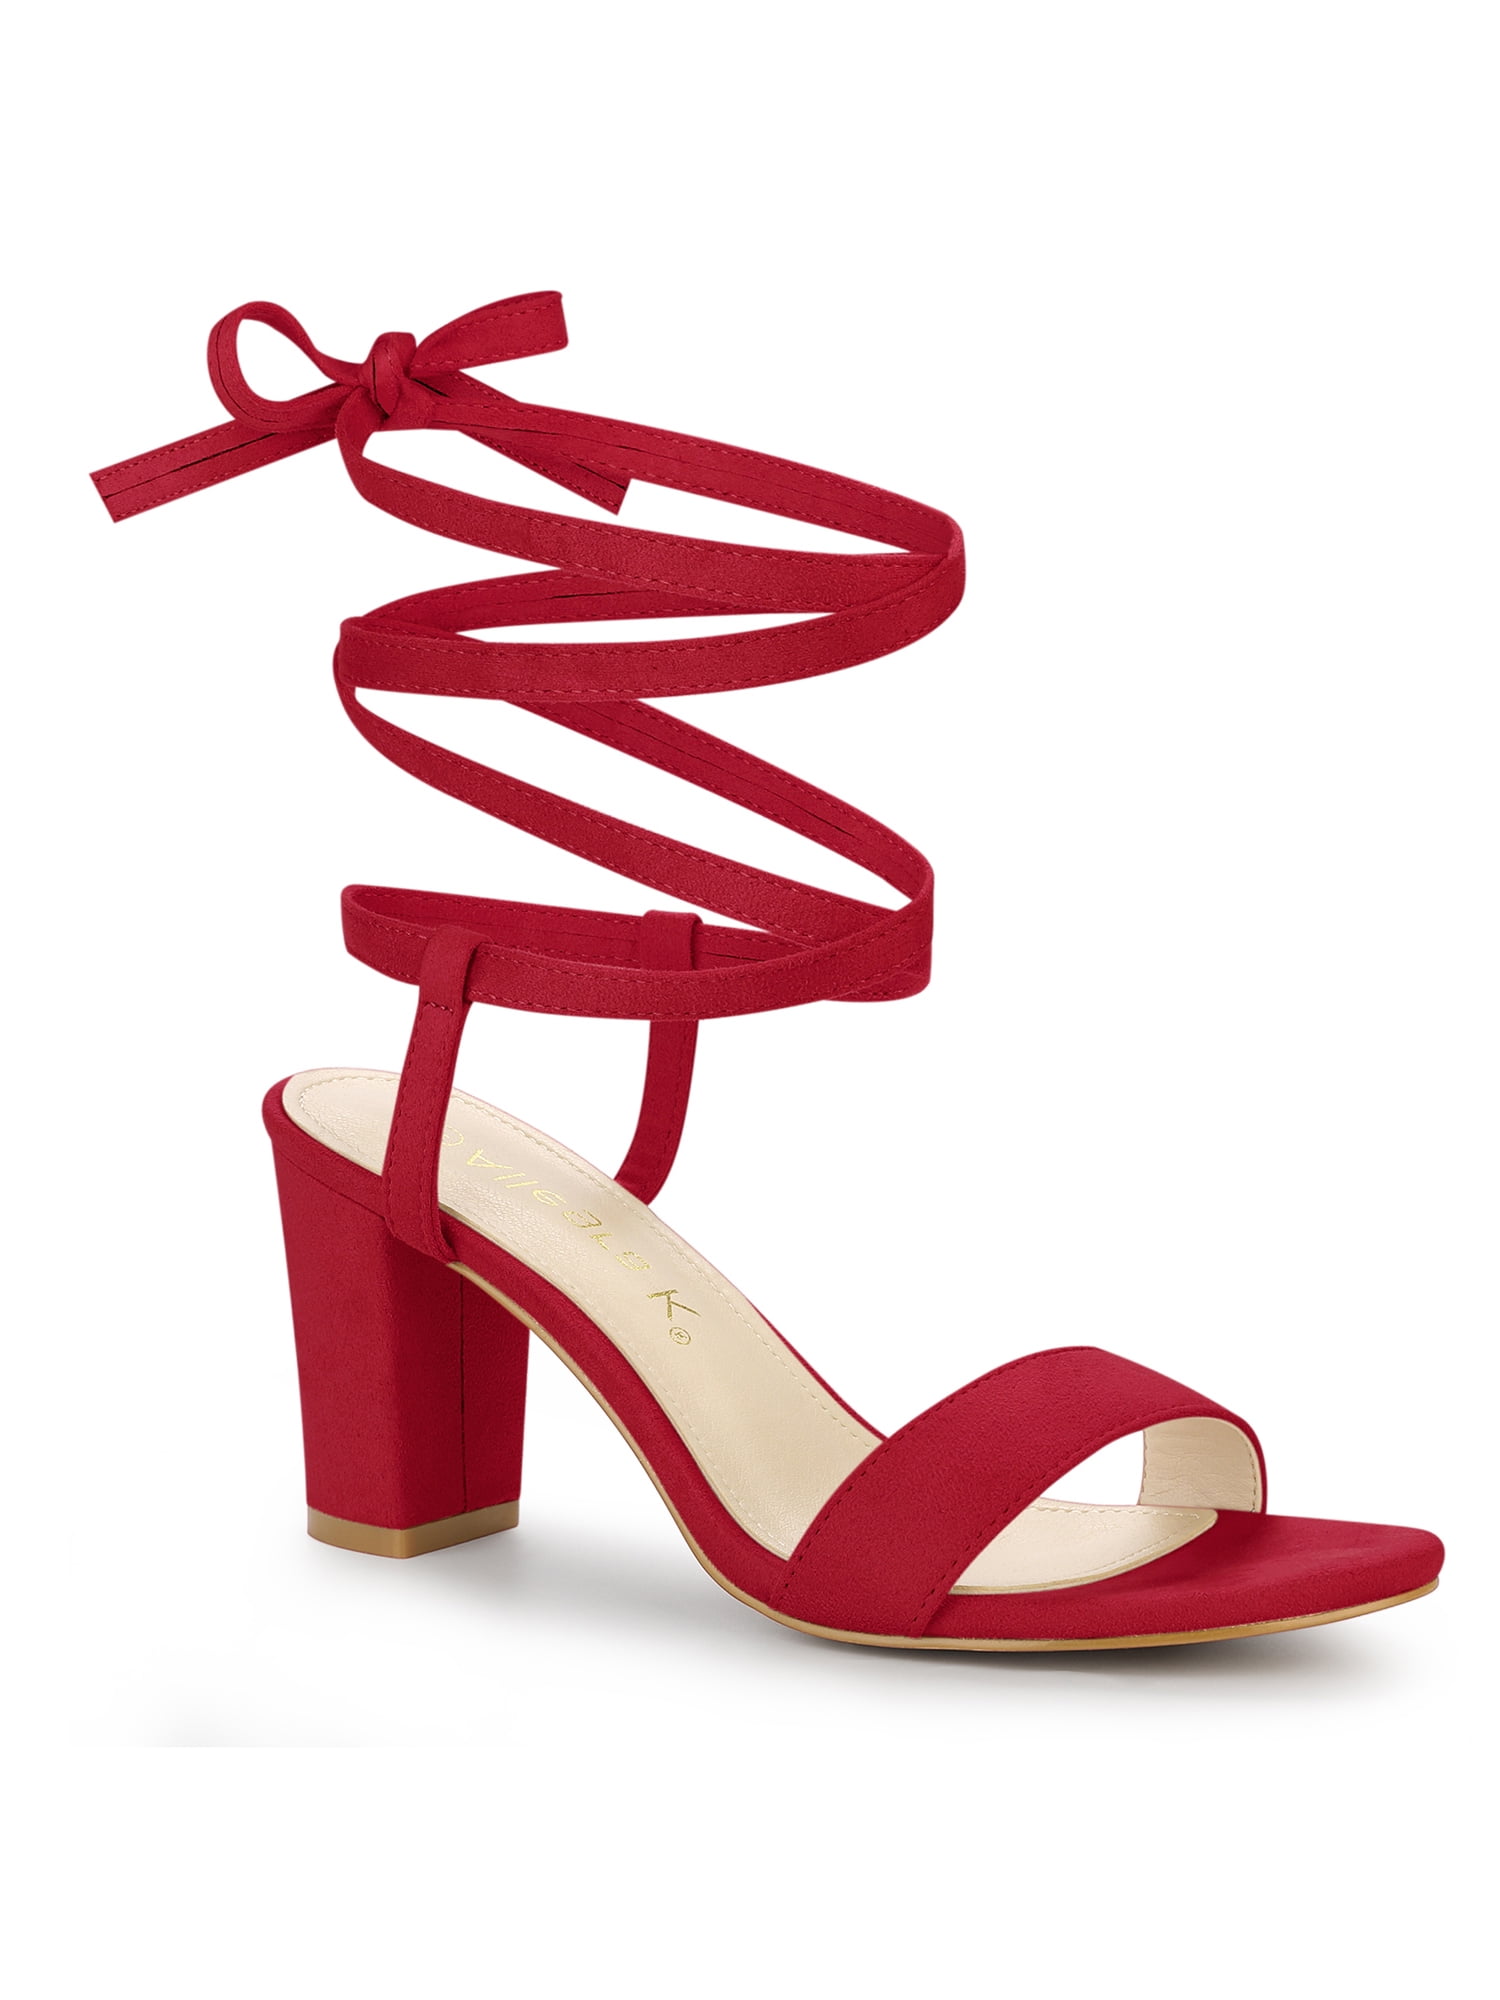 Sexy Sassy Red Heels - Boutique Cute Shoes – Shop the Mint